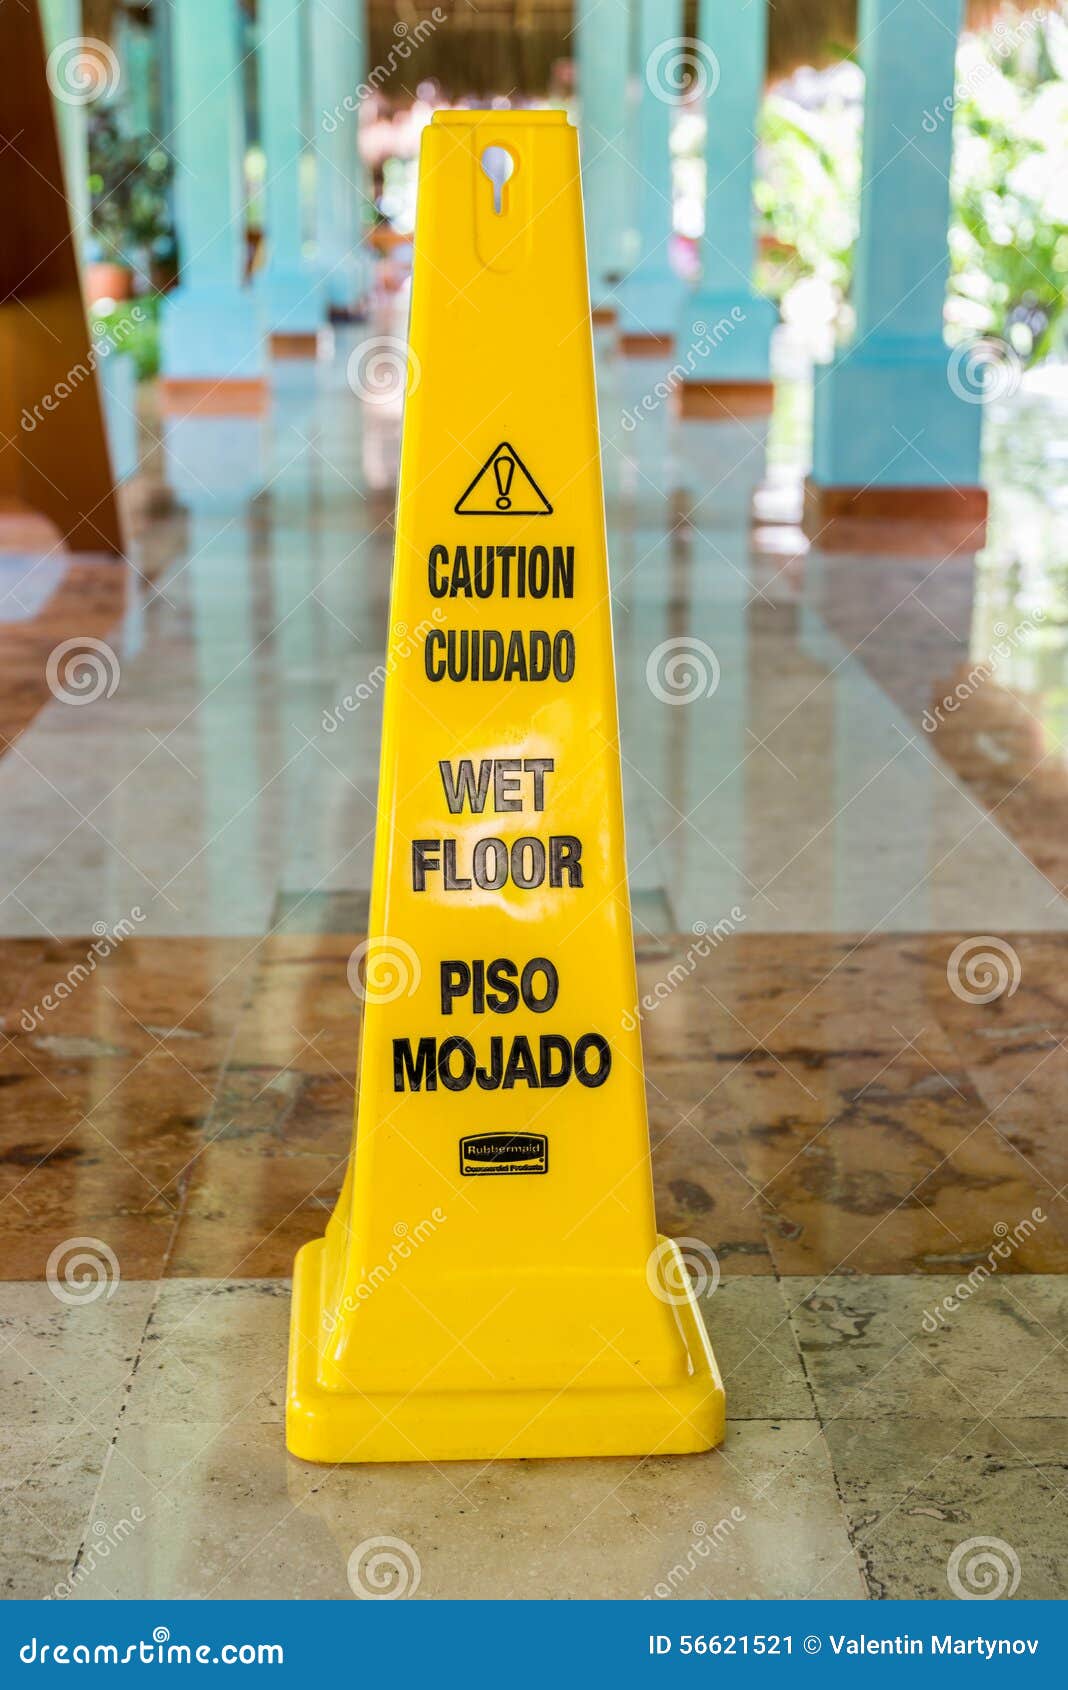 Wet Floor And Caution Warning Sign In Spanish And English Stock